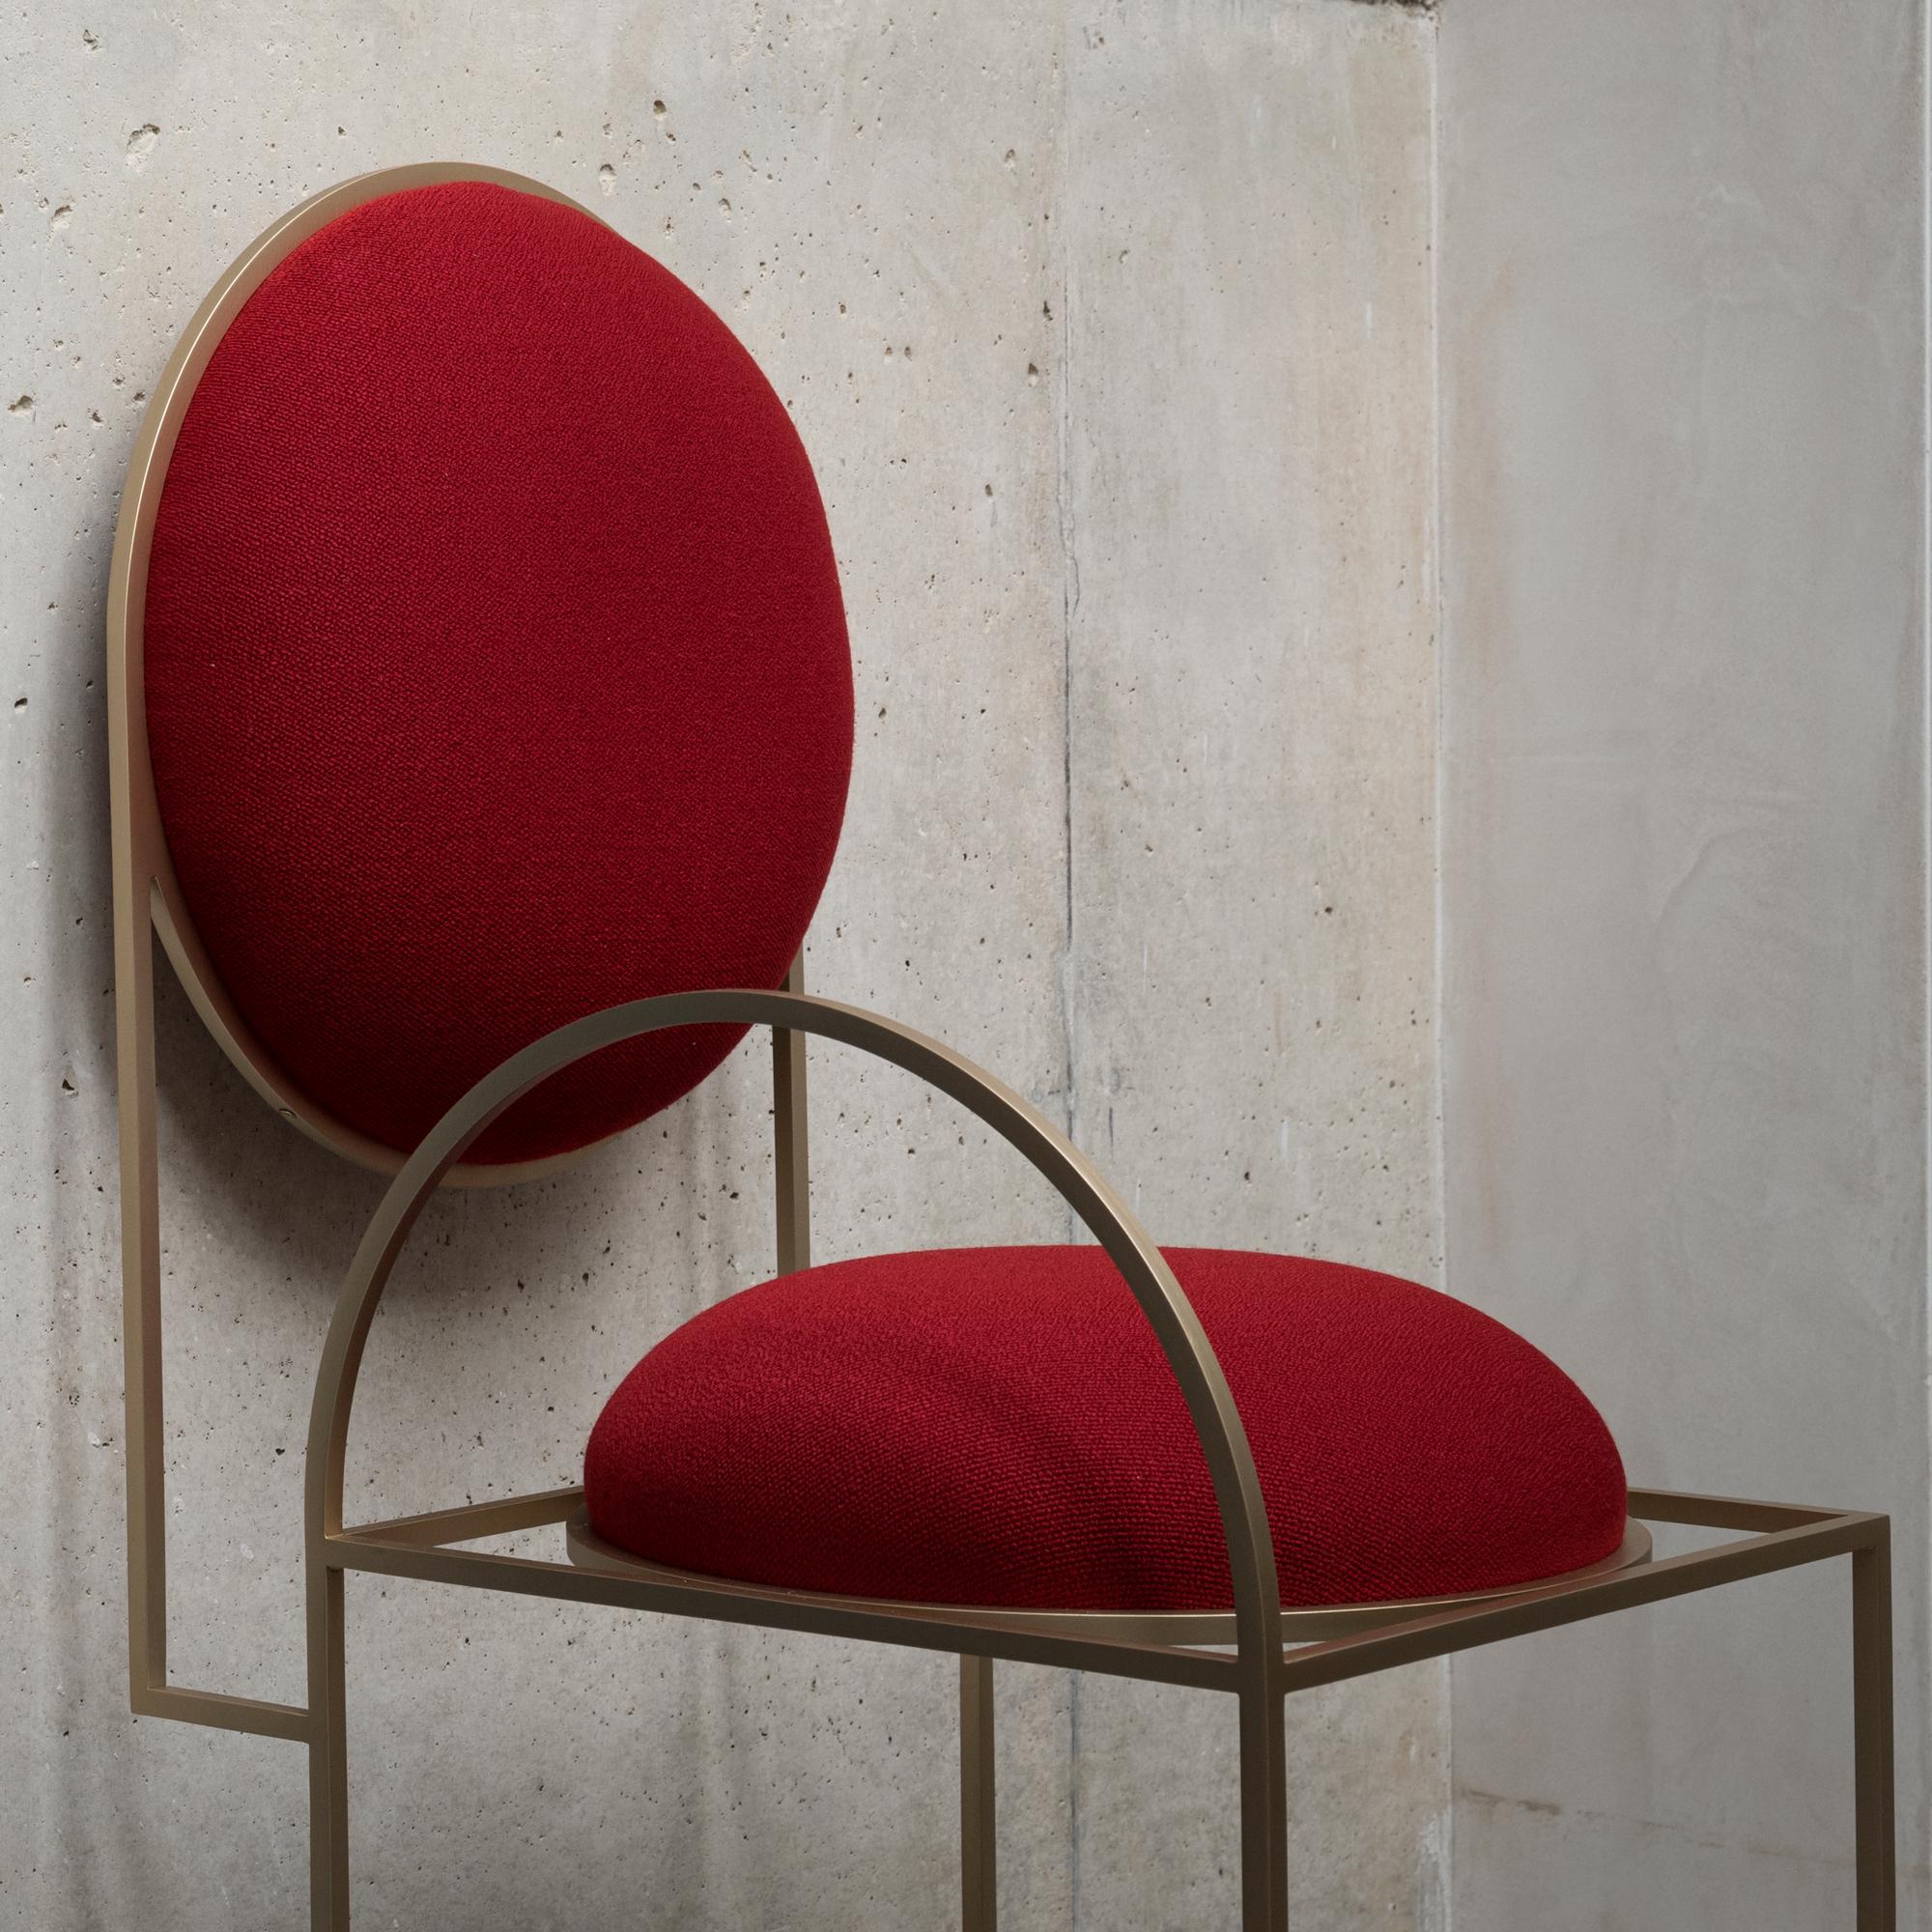 Metalwork Solar Chair in Red Wool Fabric and Brushed Brass Frame by Lara Bohinc